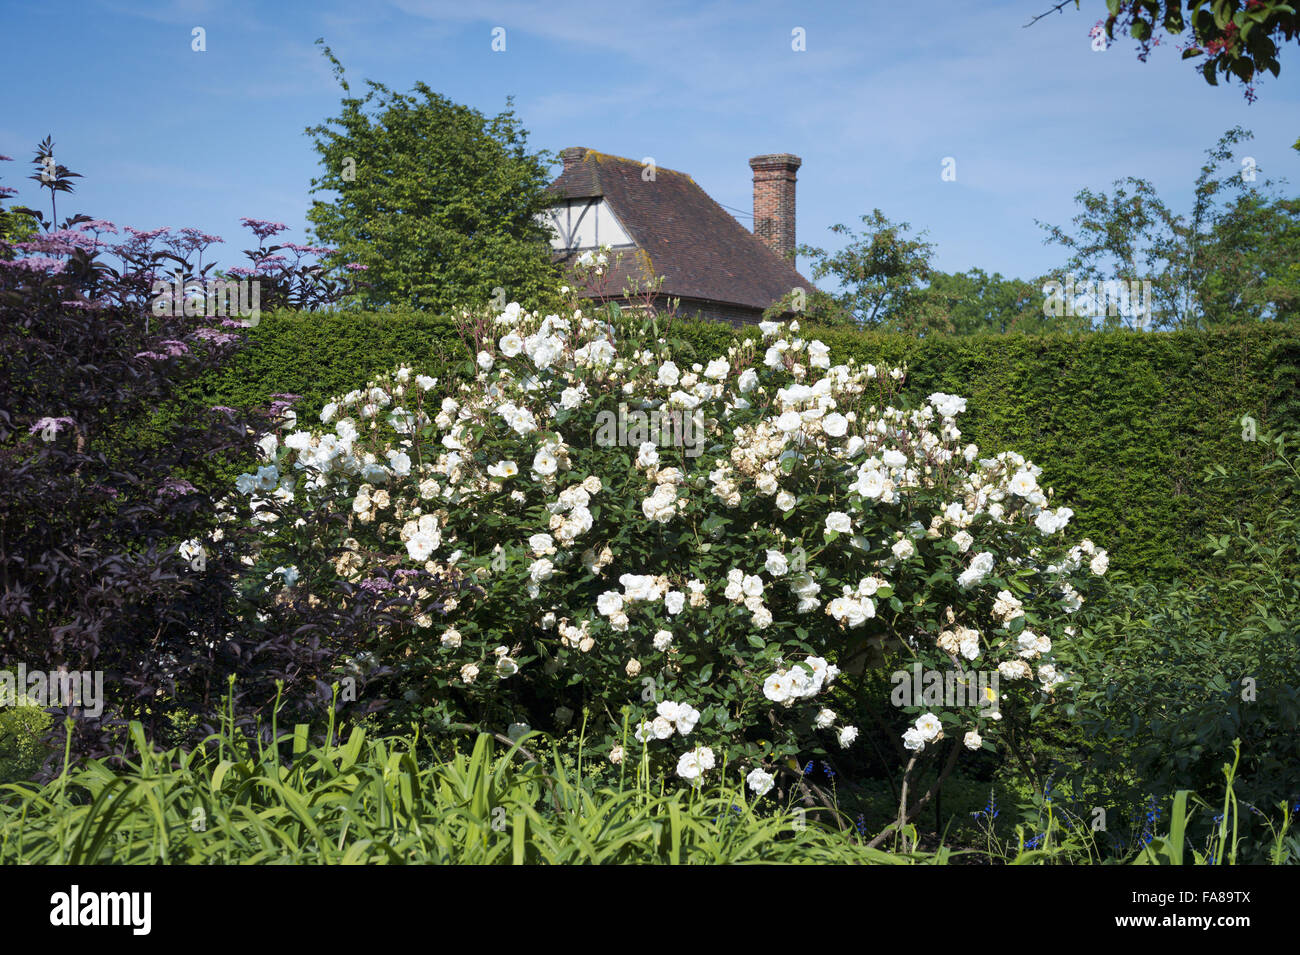 The gardens in July at Sissinghurst Castle, Kent. Sissinghurst gained international fame in the 1930s when Vita Sackville-West and Harold Nicolson created a garden there. Stock Photo